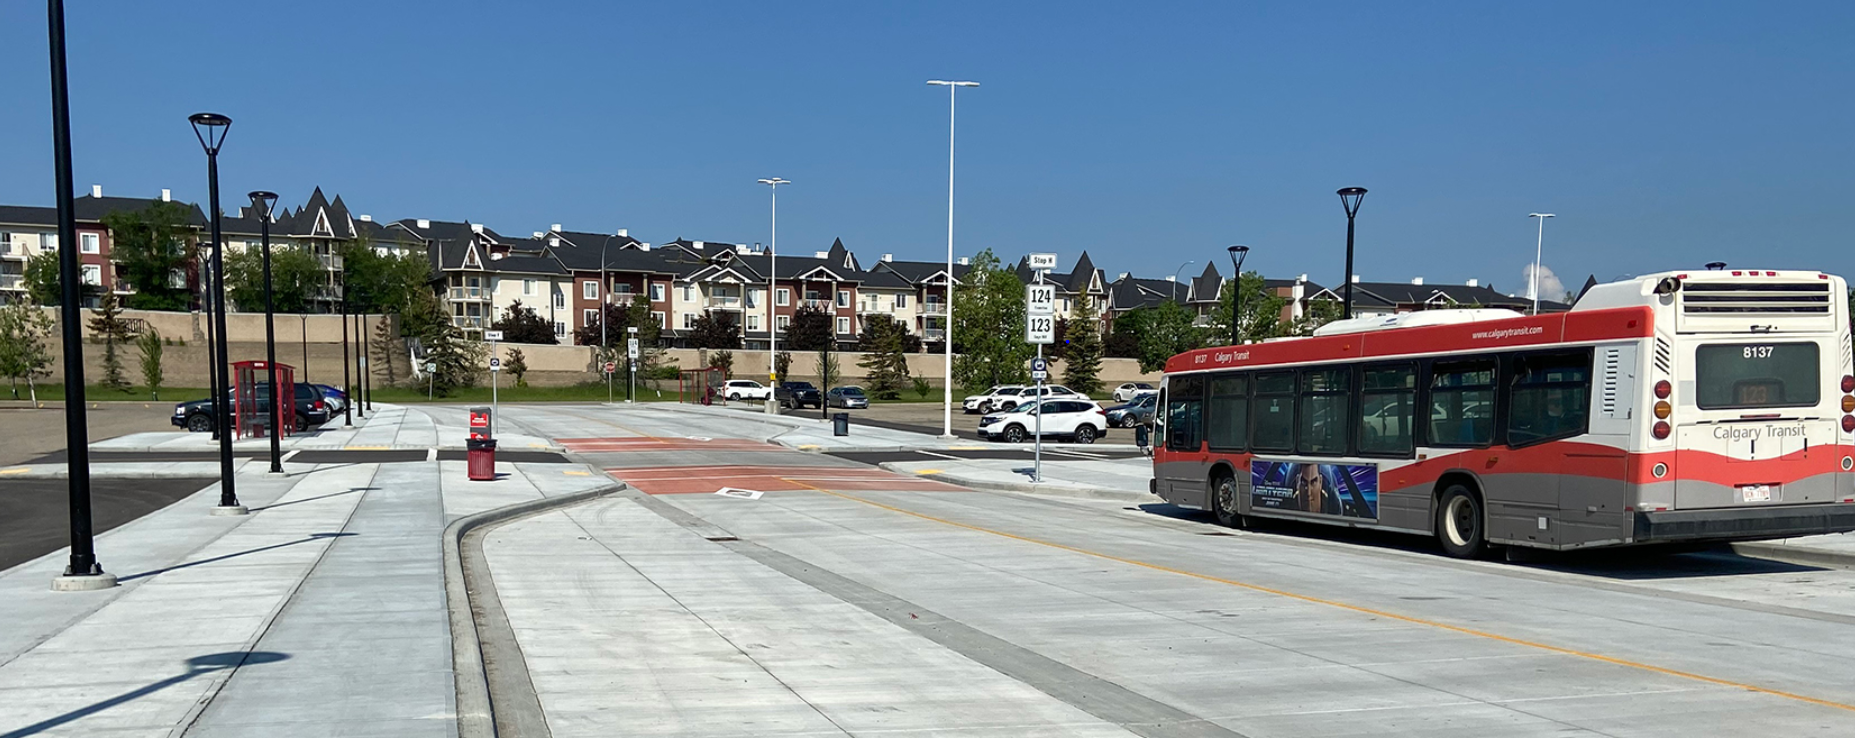 Bus park at North Pointe Park and Ride lot, with cars in parking spots in the background.